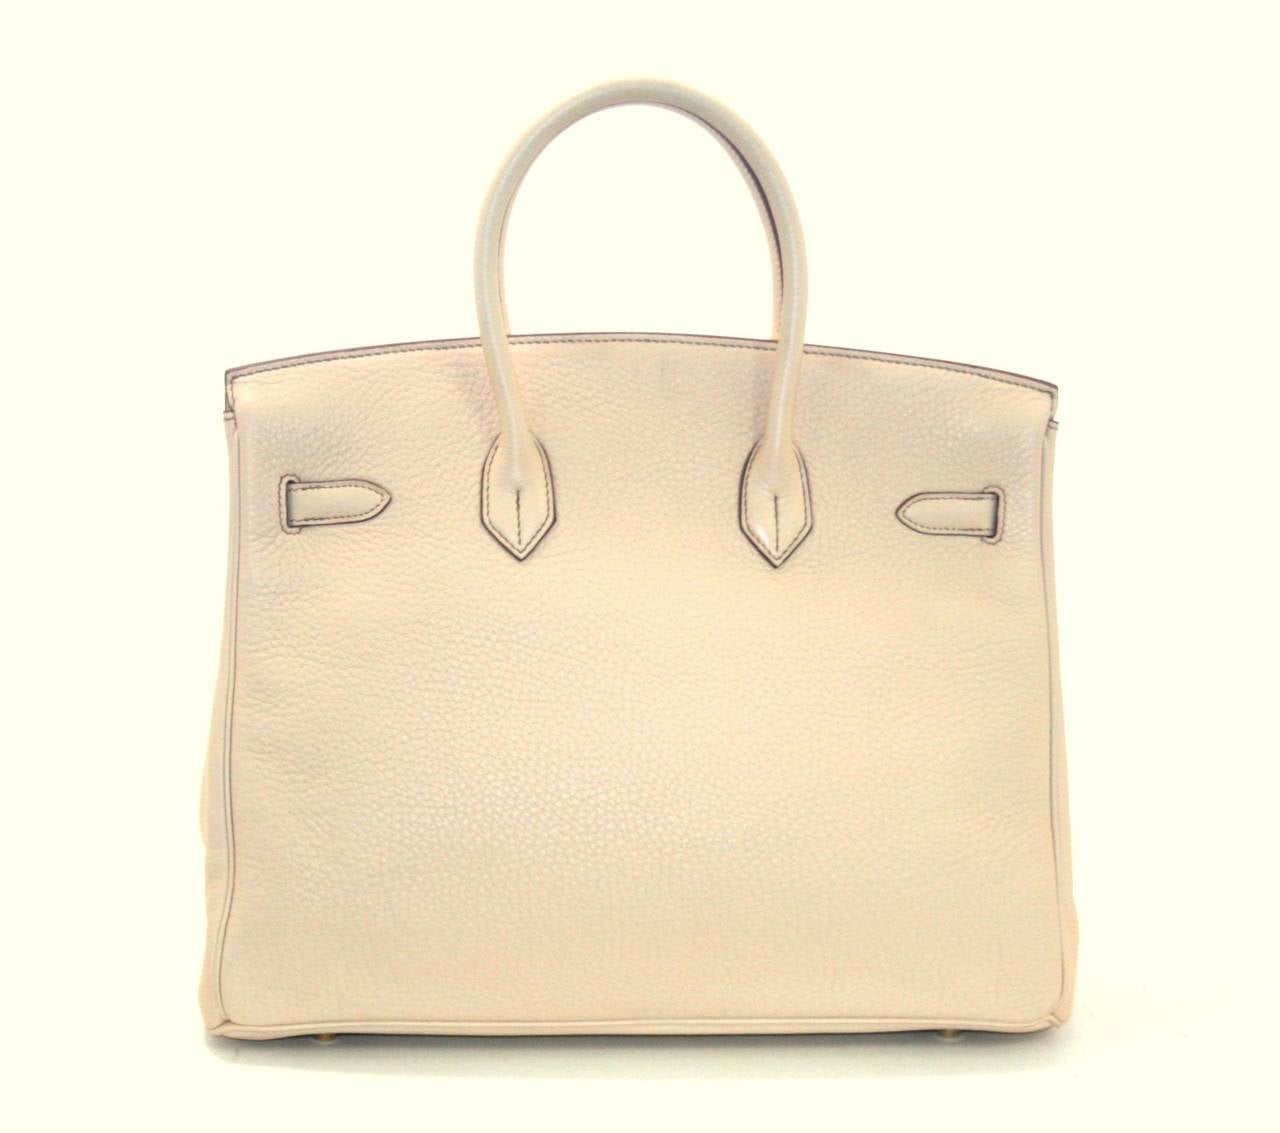 Hermes Beige Clemence Birkin in 35 cm size; nearly pristine.  Protective plastic remains intact on all hardware except the feet and toggle; carried perhaps one time.     Crafted by hand and considered by many as the epitome of luxury items, Birkins